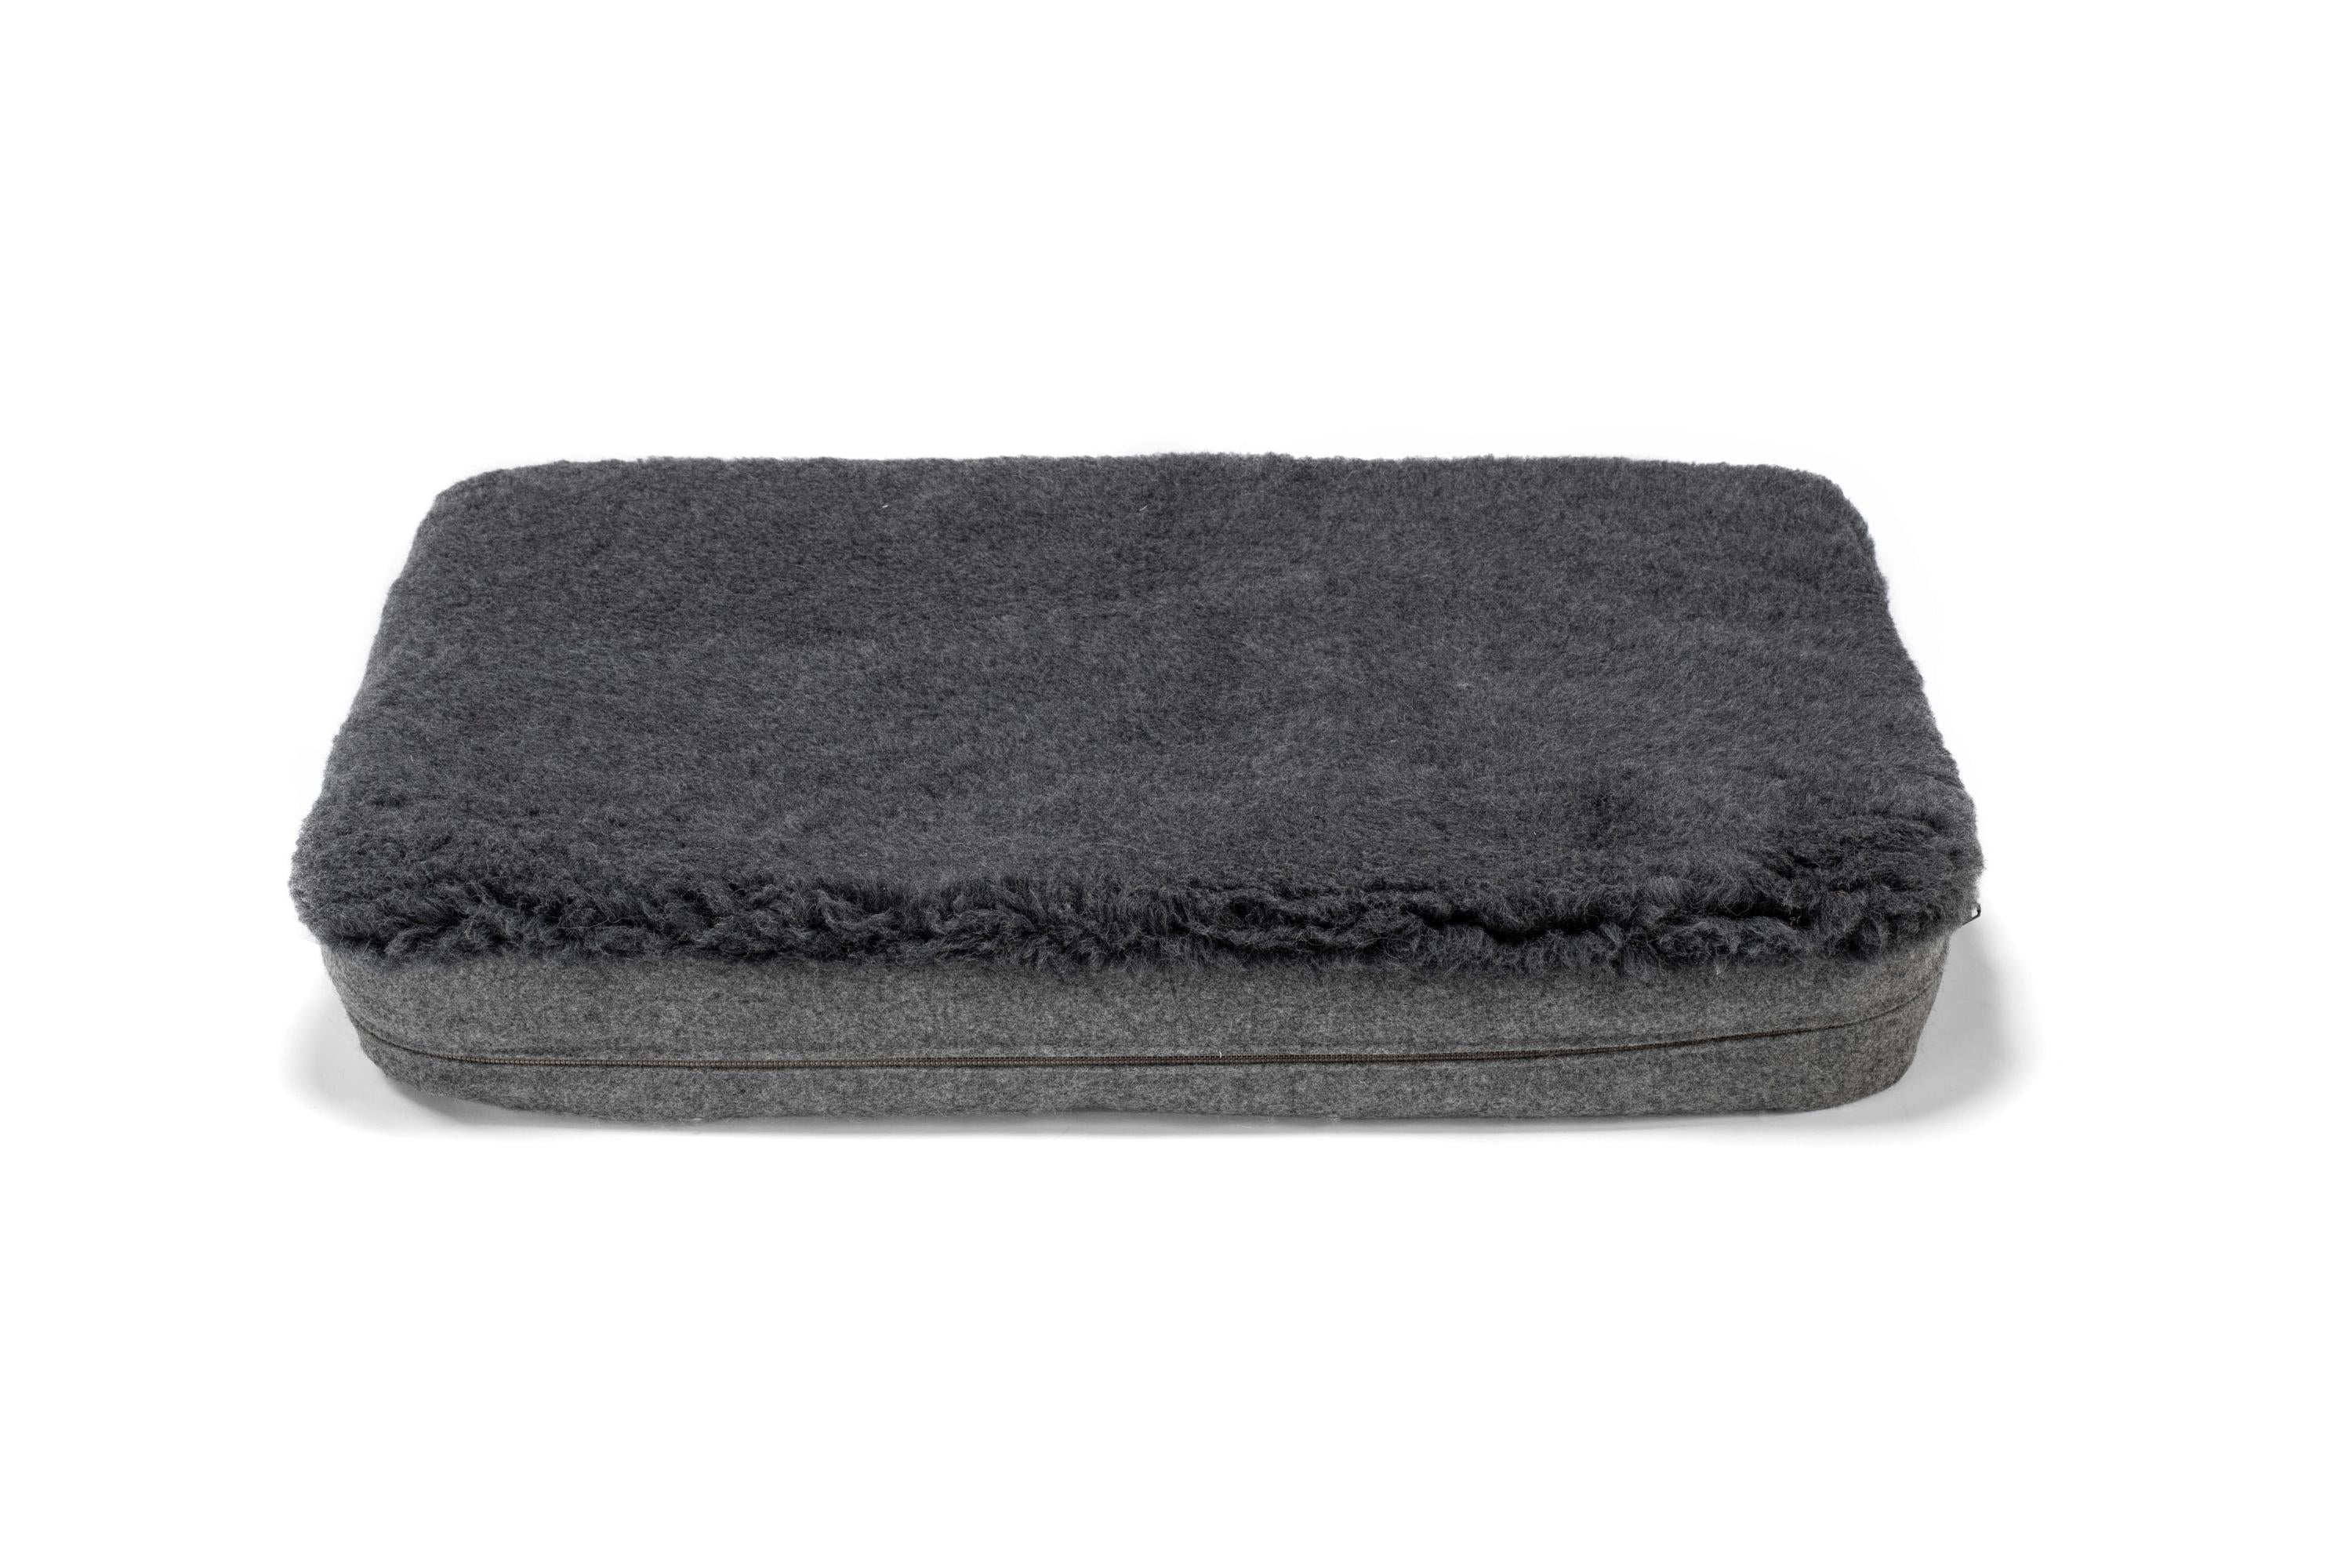 Slate Grey Classic Dog Bed Mattress Cover